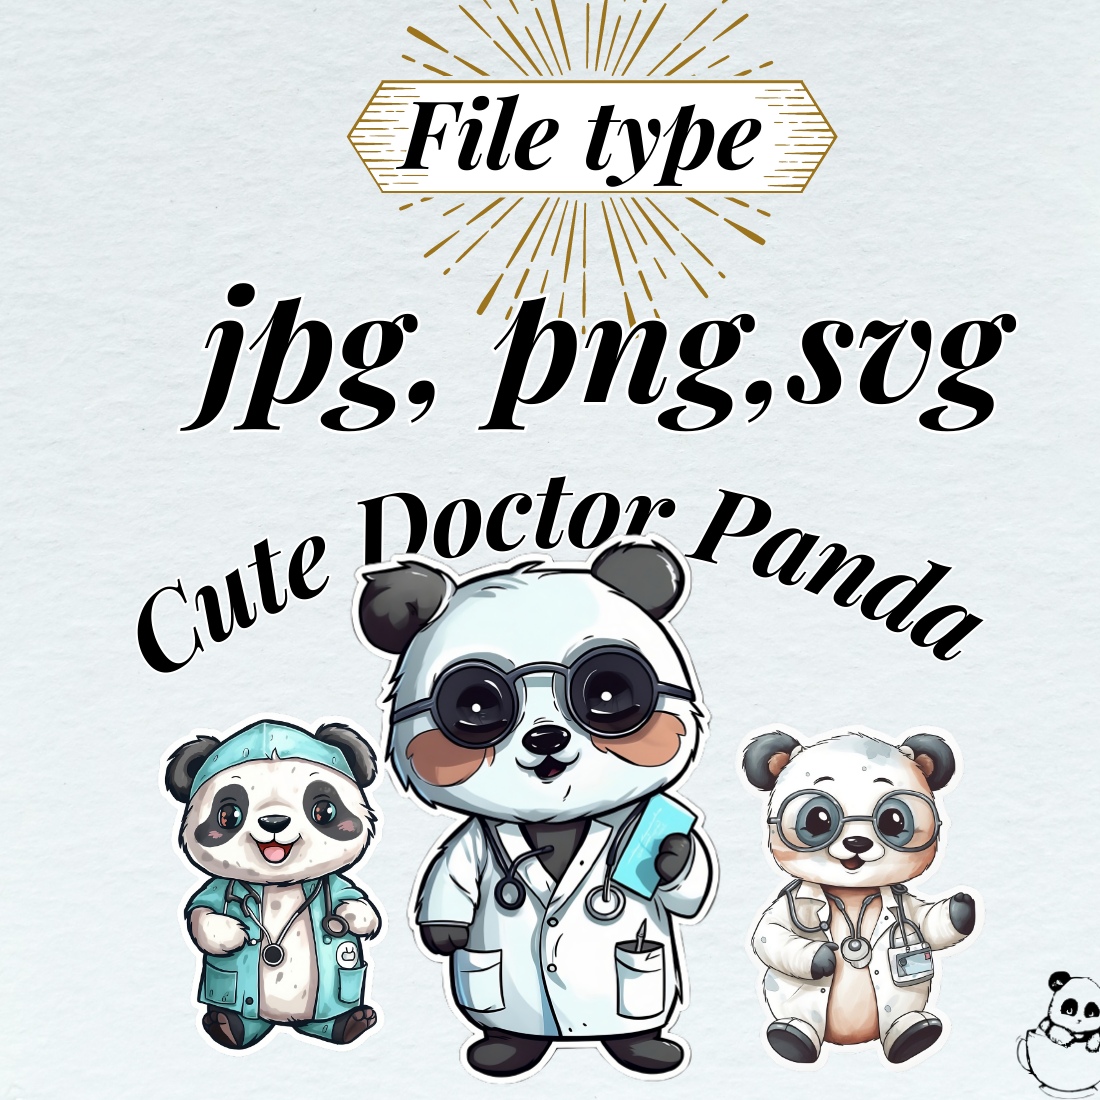 Cute Doctor Panda watercolor illustration and sticker preview image.